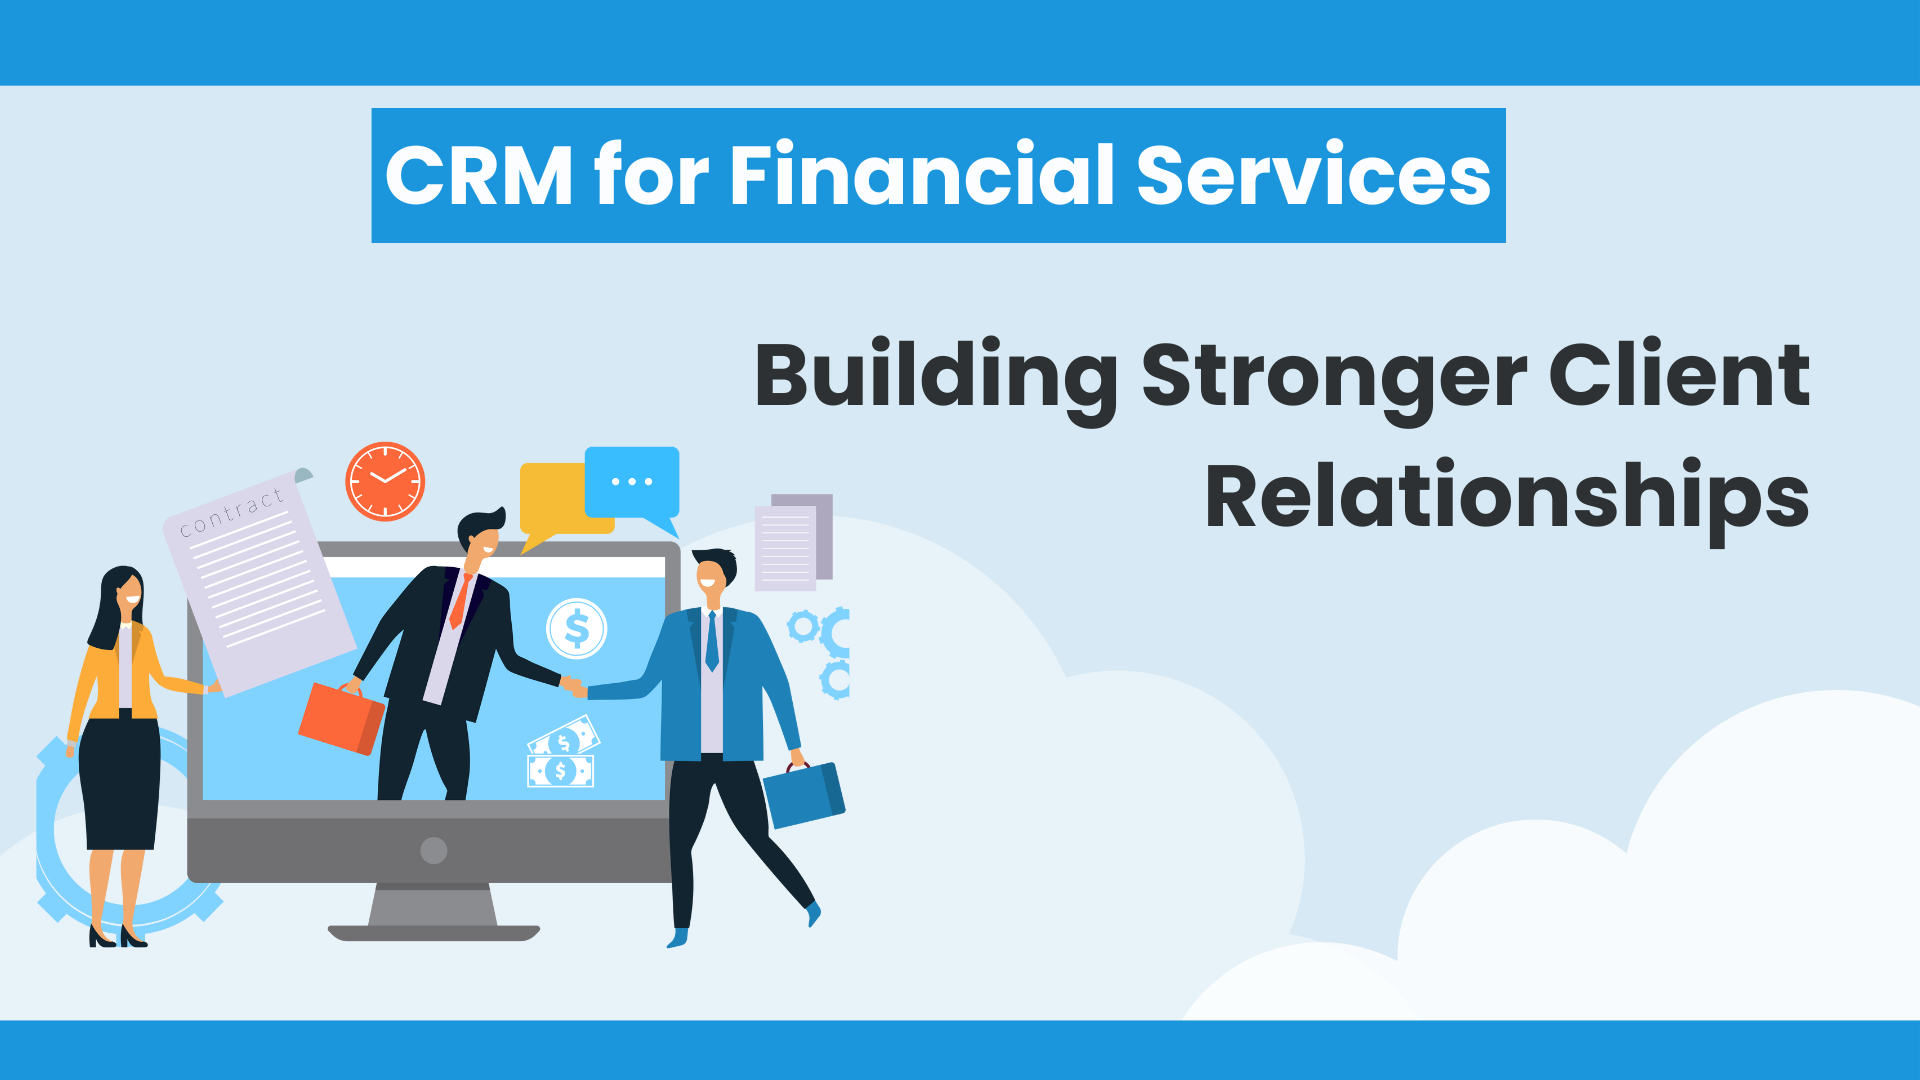 CRM for Financial Services: Building Stronger Client Relationships